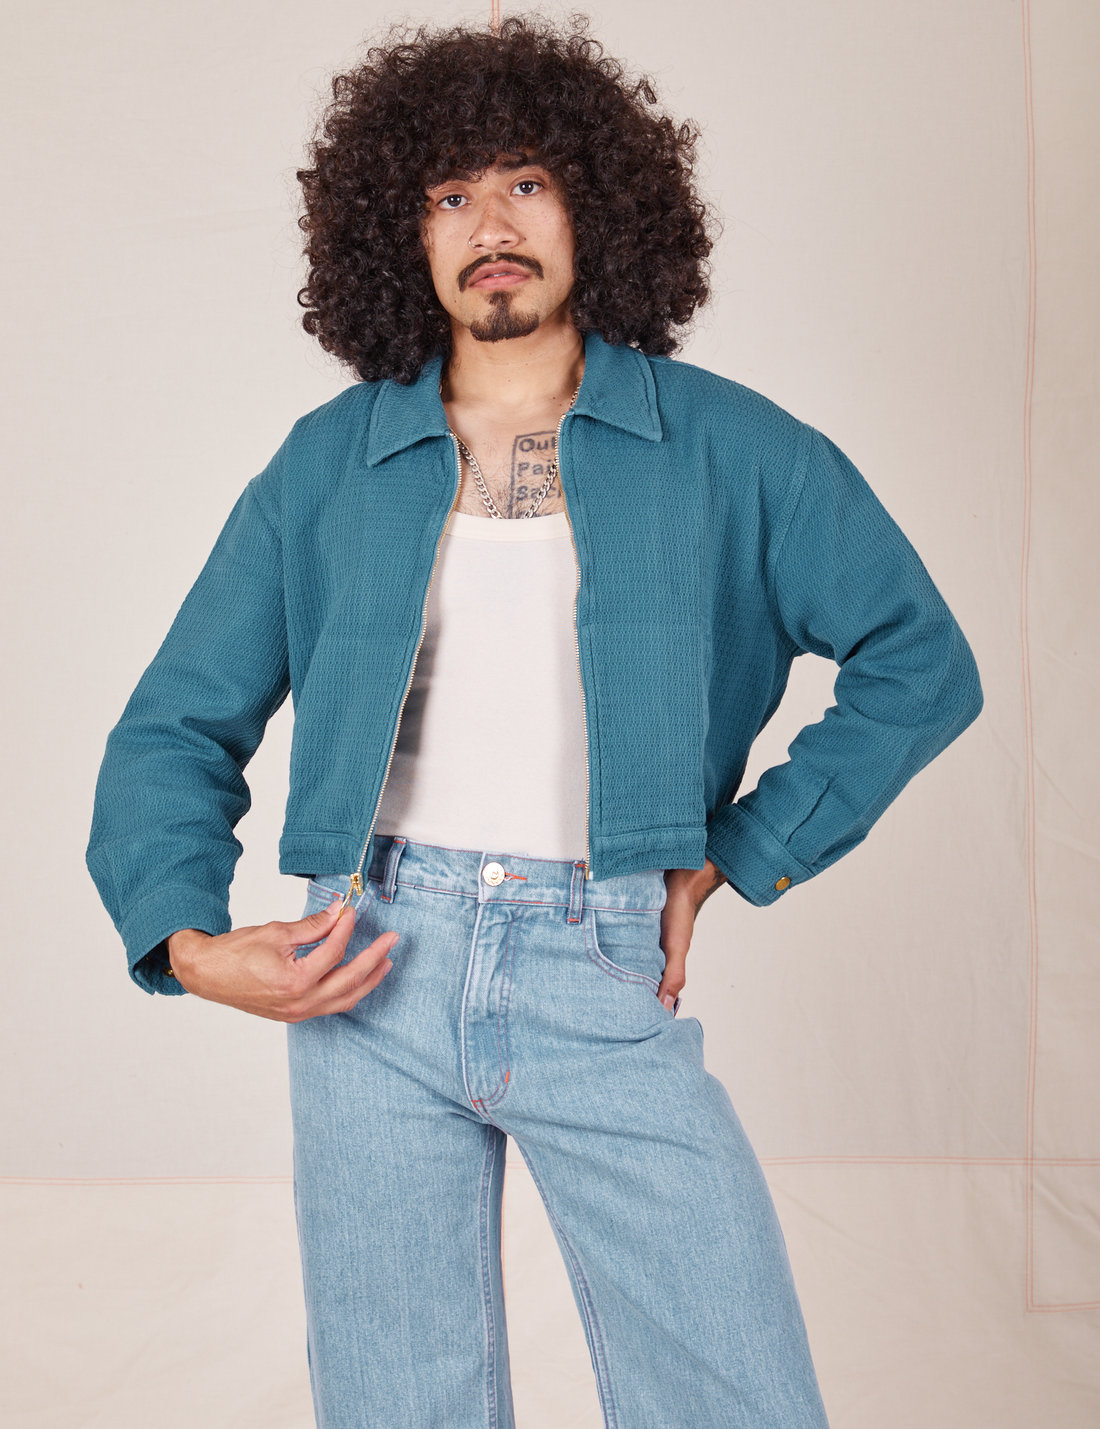 Ricky Jacket in Marine Blue, vintage off-white Tank Top, and light wash Frontier Jeans on Jesse